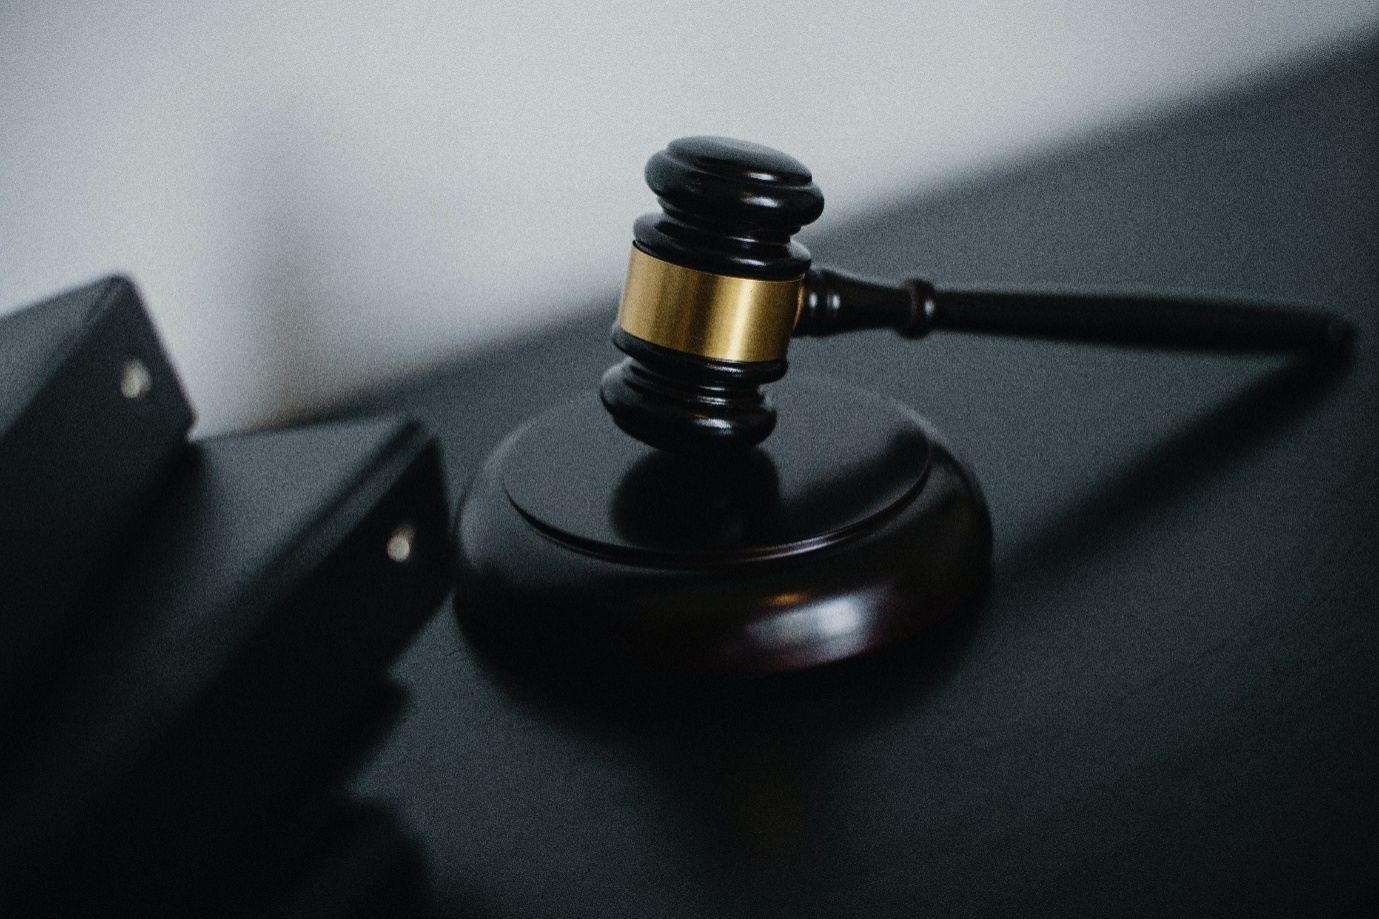 A gavel placed on a judge’s table